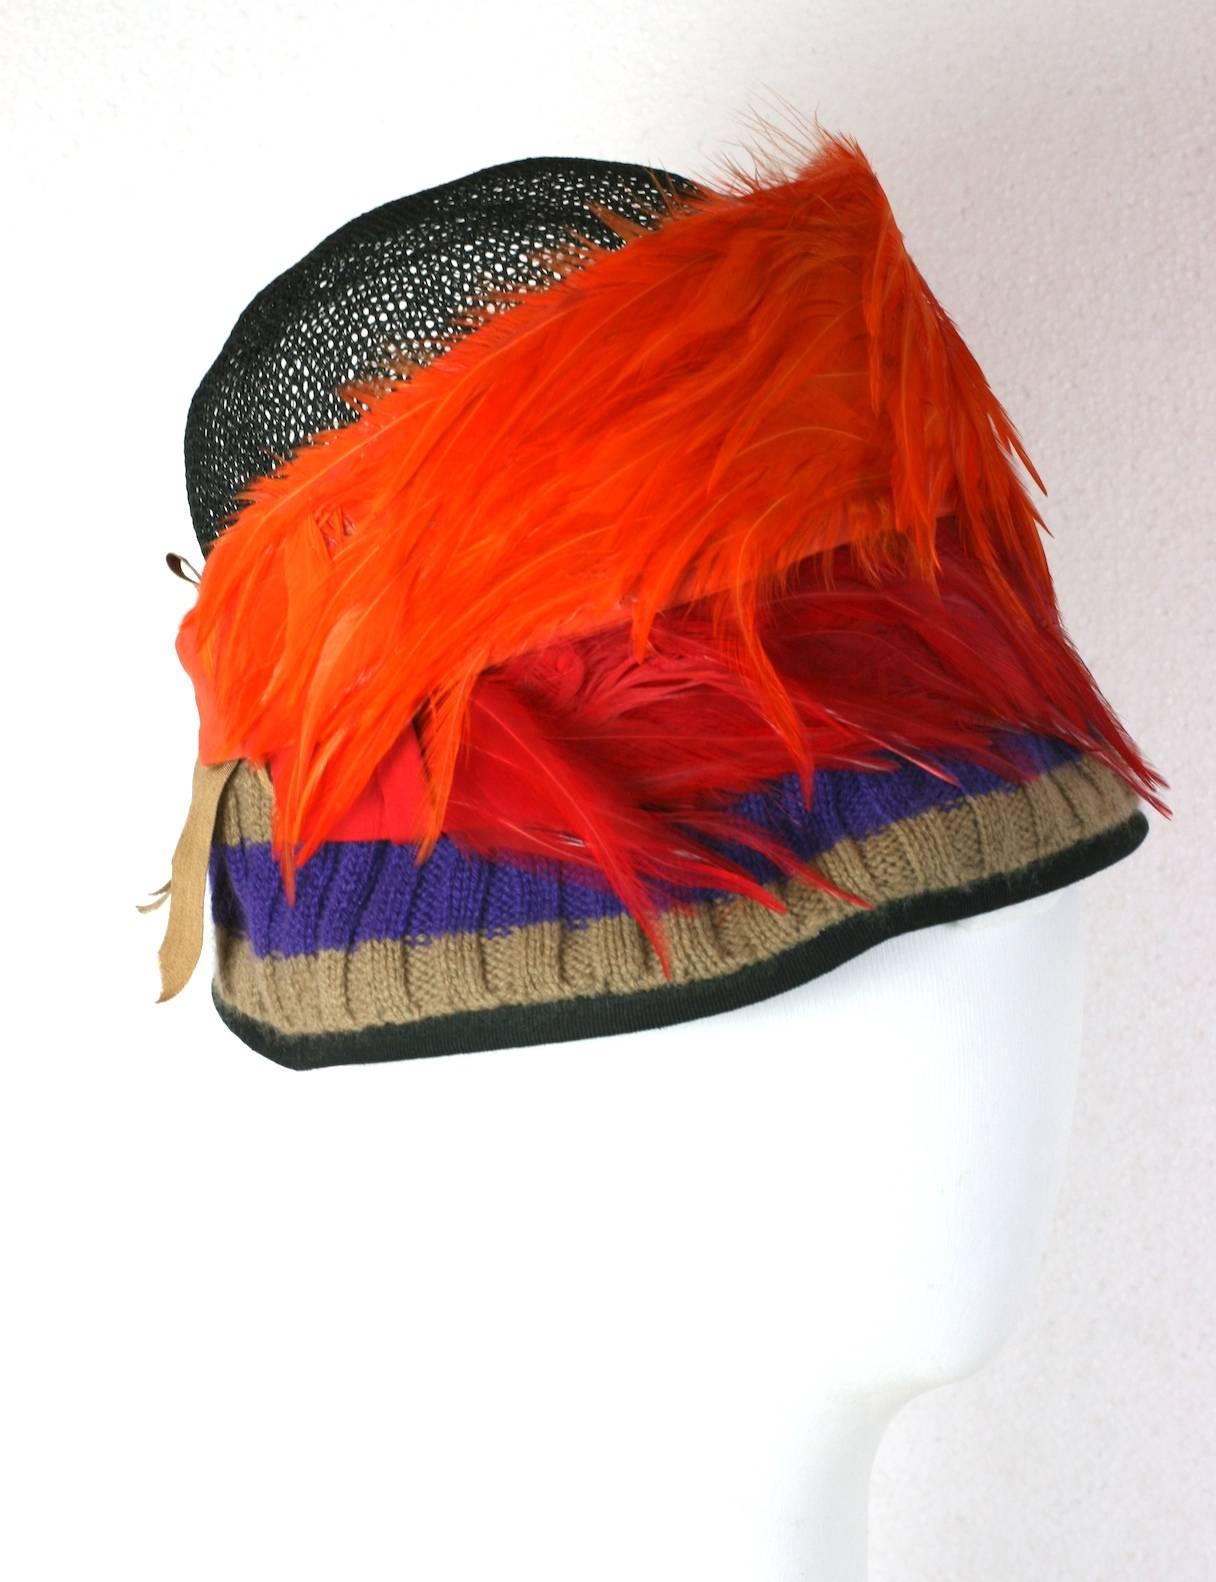 Prada Spring 2005 Collectors Exotic Feather Cloche Hat. look 42.
Bright plumes mixed with wool knit, grosgrain ribbon and synthetic mesh.
4